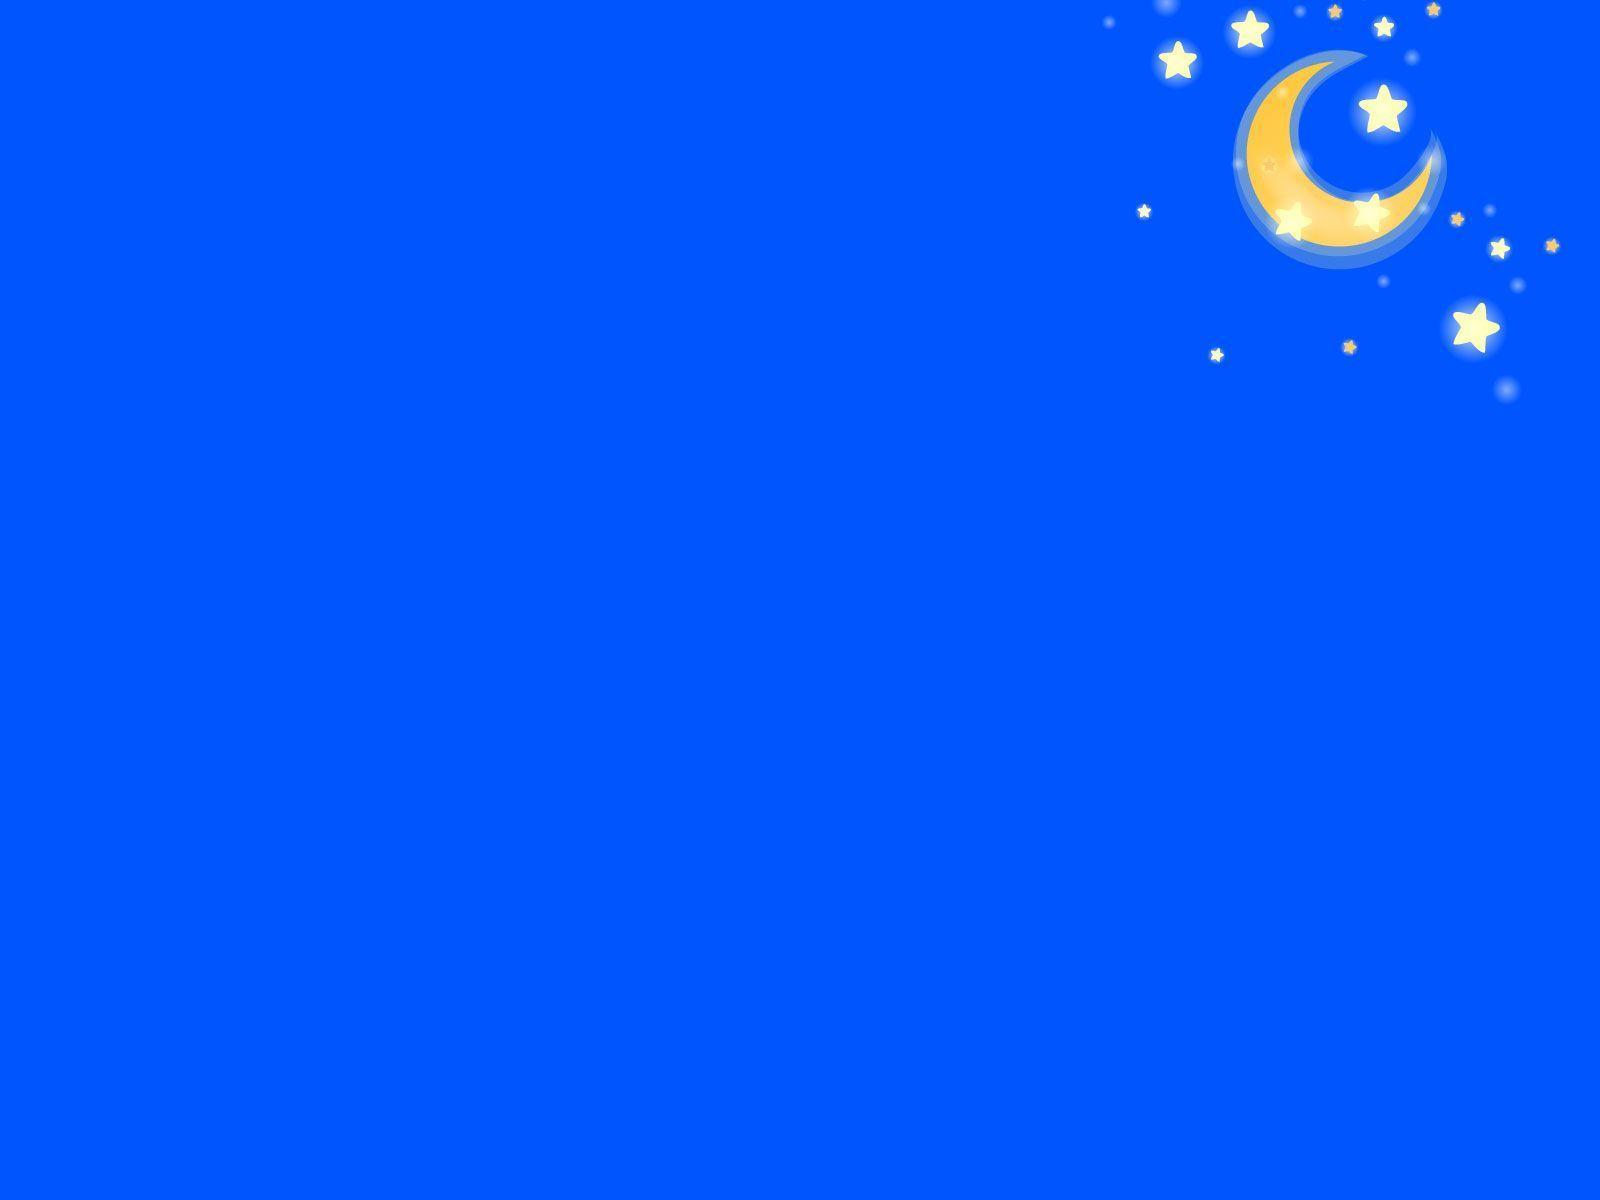 Stars Moon Backgrounds for Powerpoint Presentations, Stars Moon